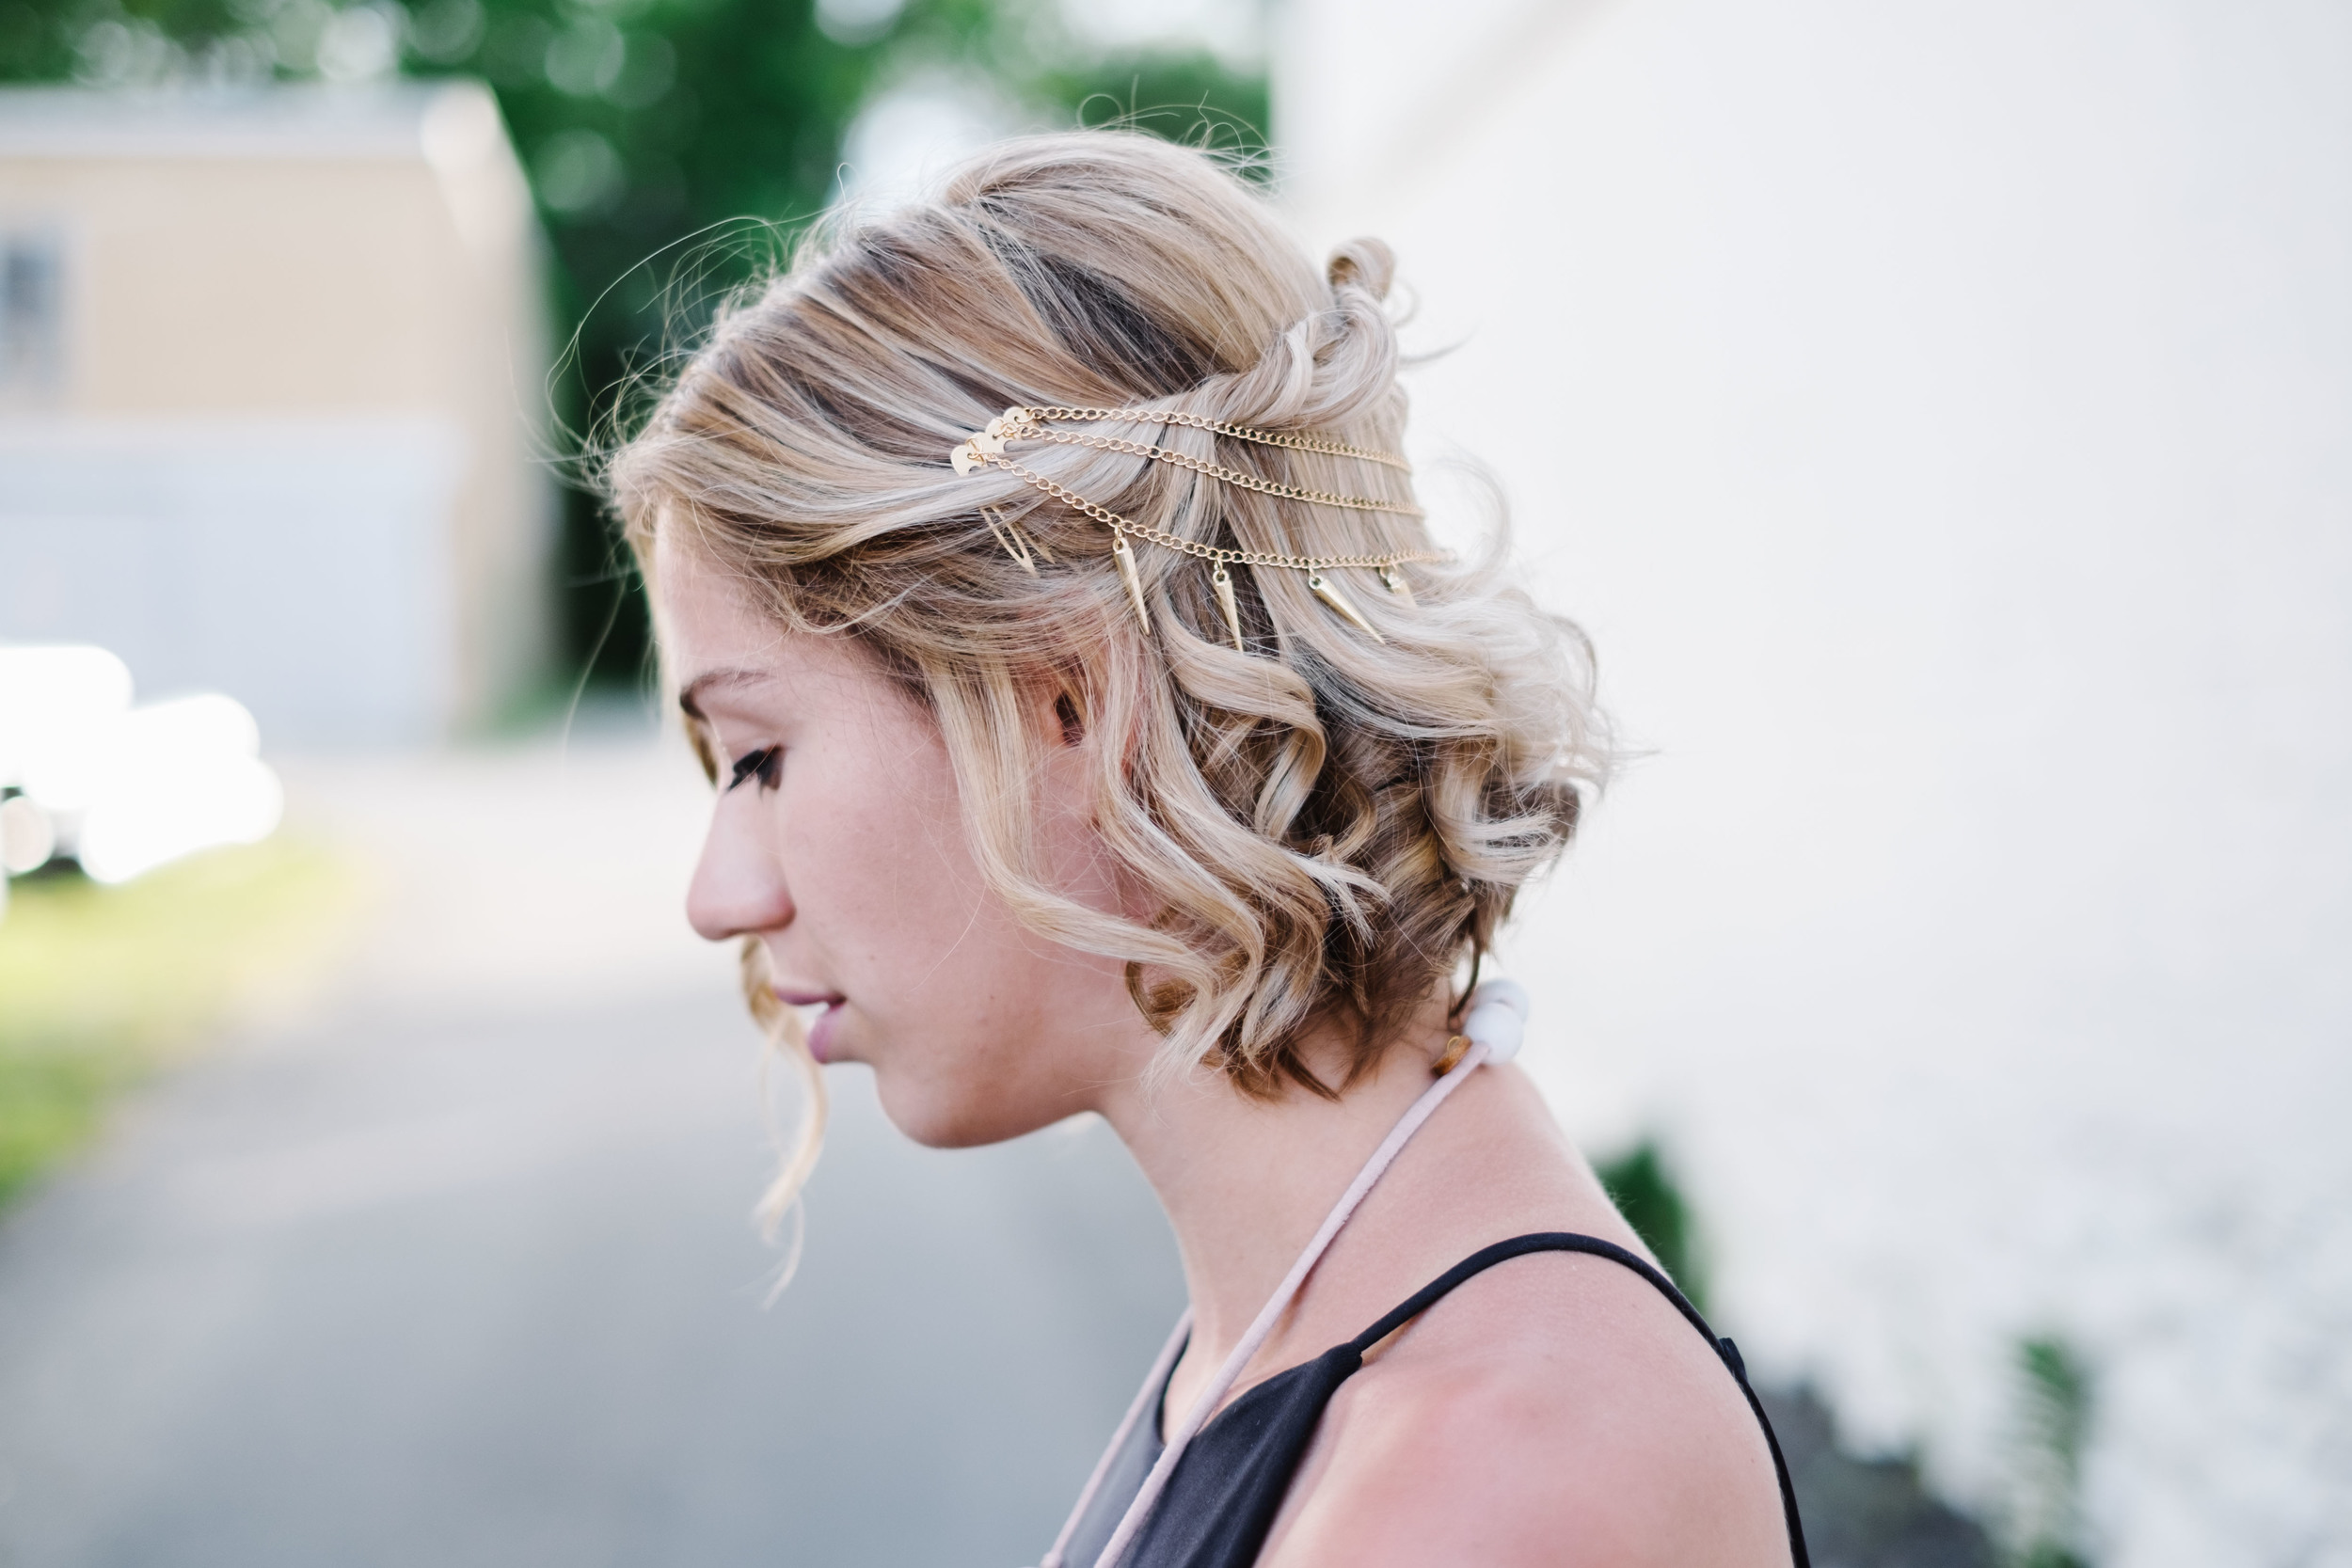 Romantic Hairstyles Perfect for Date Night | Makeup.com